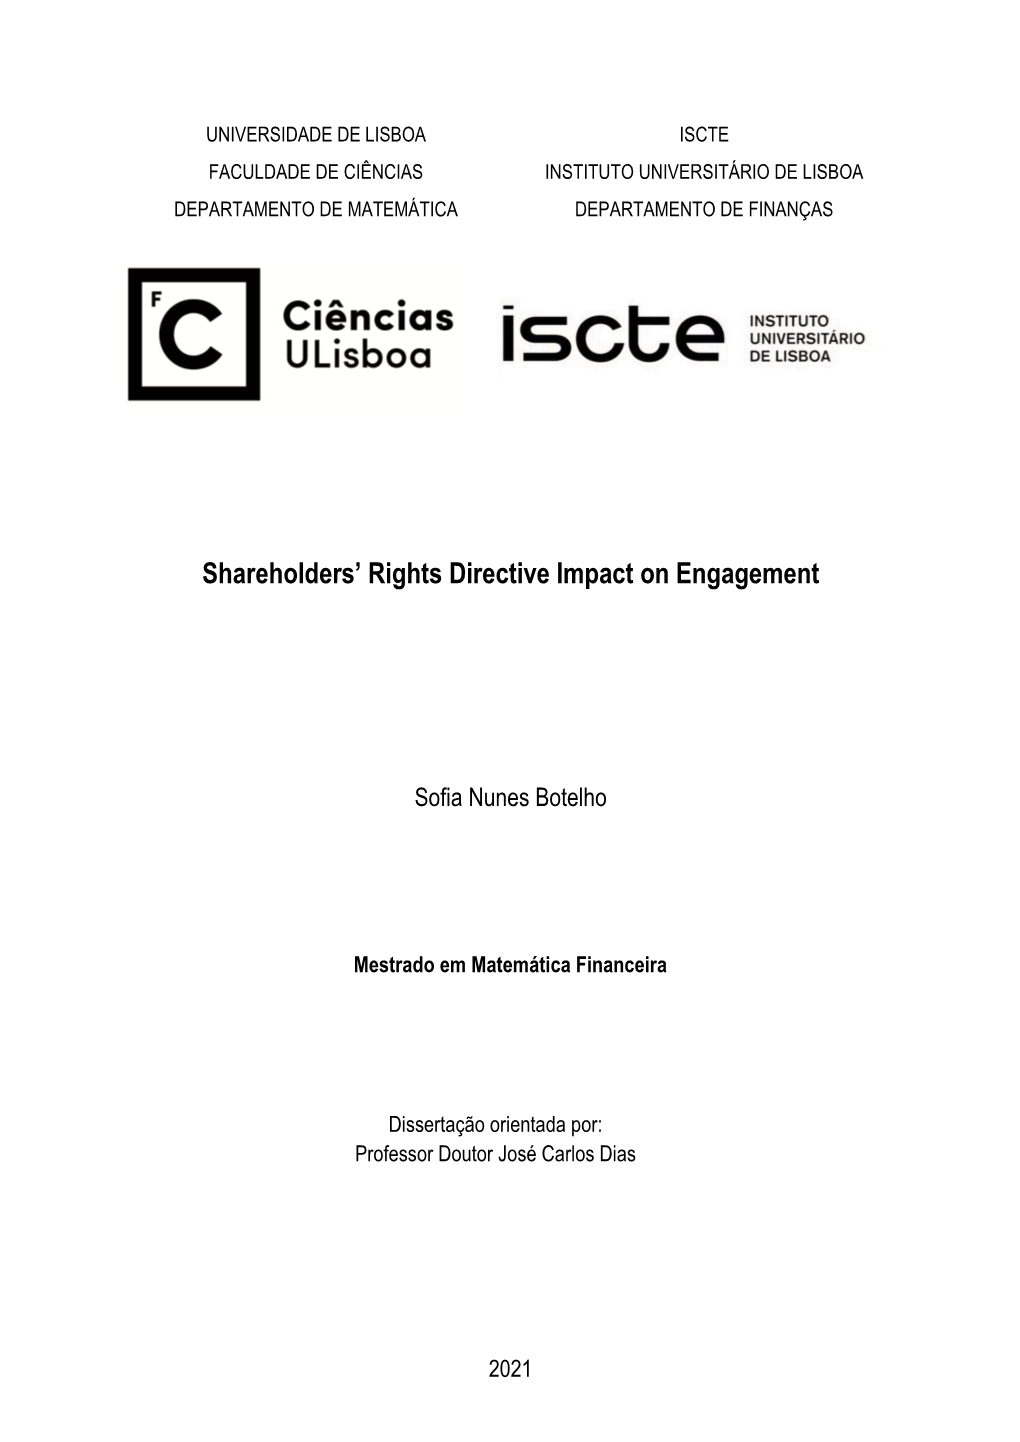 Shareholders' Rights Directive Impact on Engagement